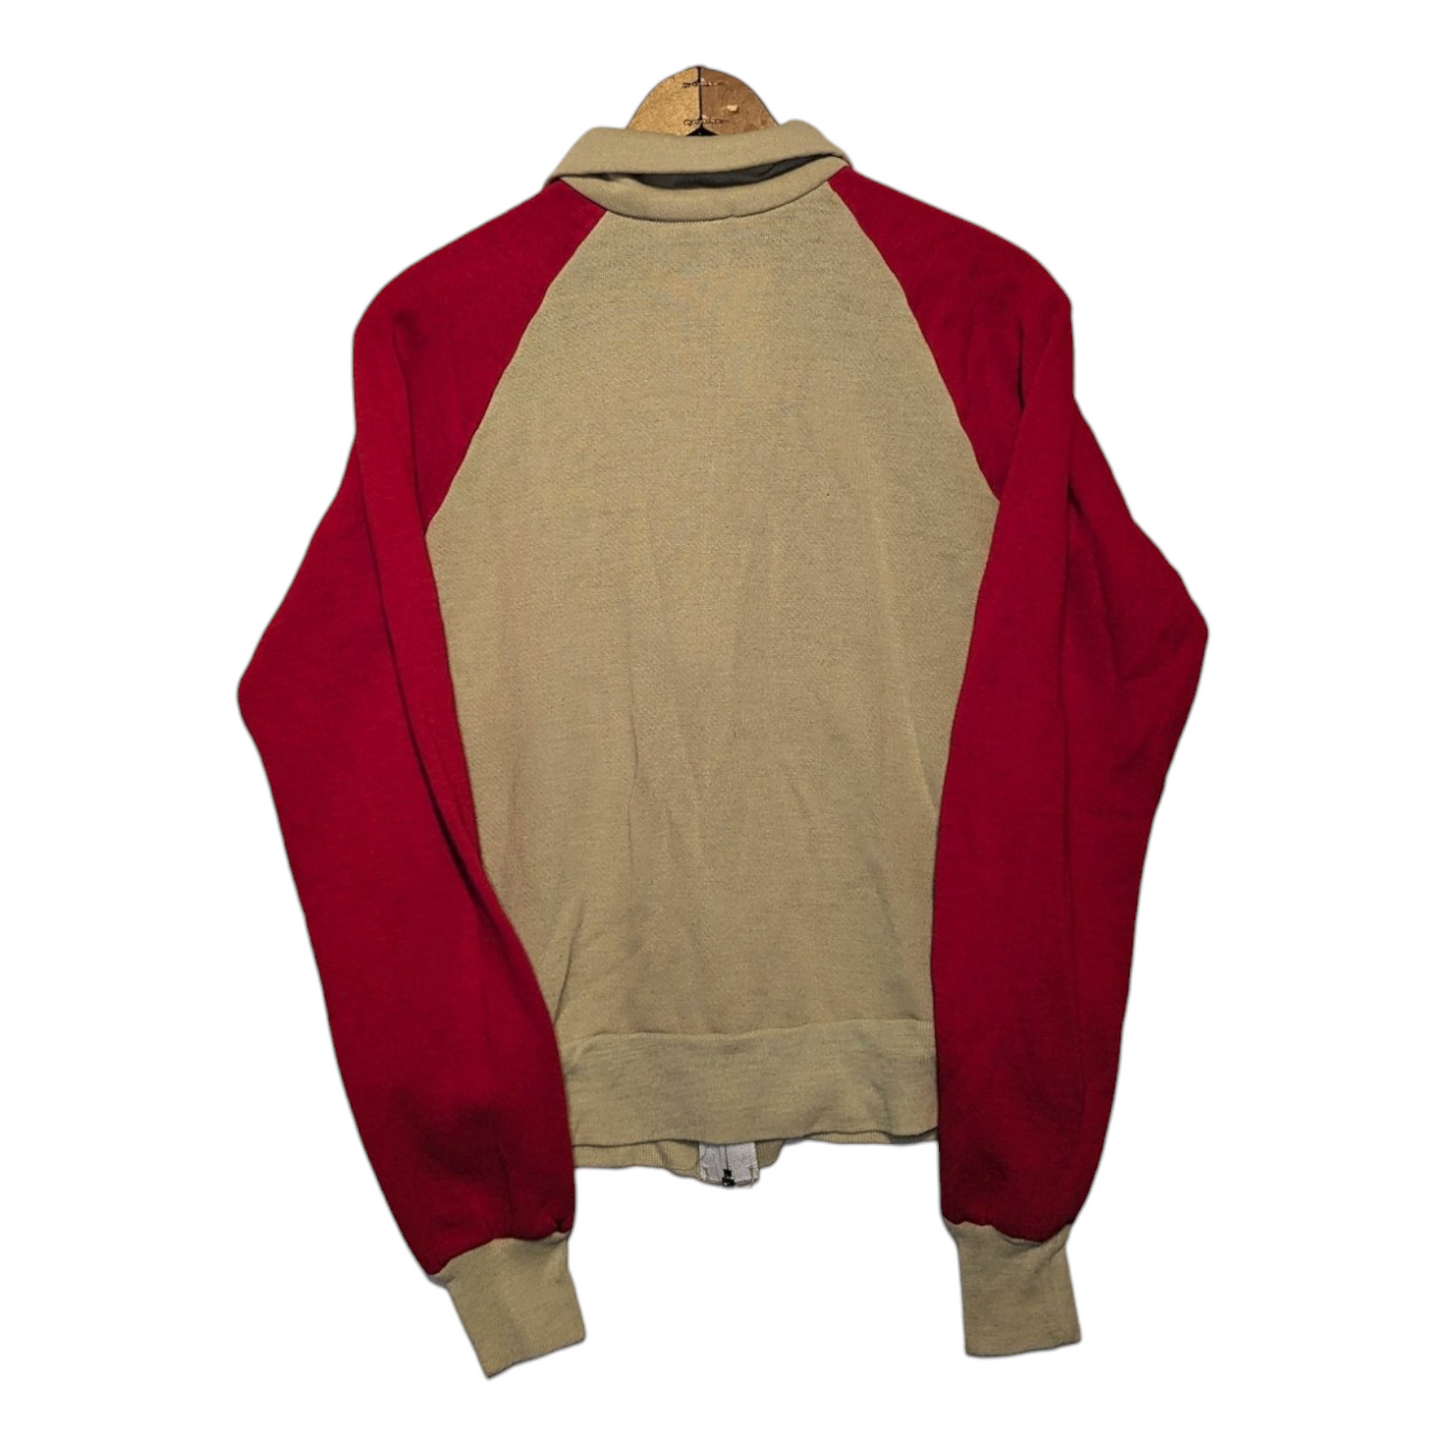 70s ManLee red and tan full zip running jacket